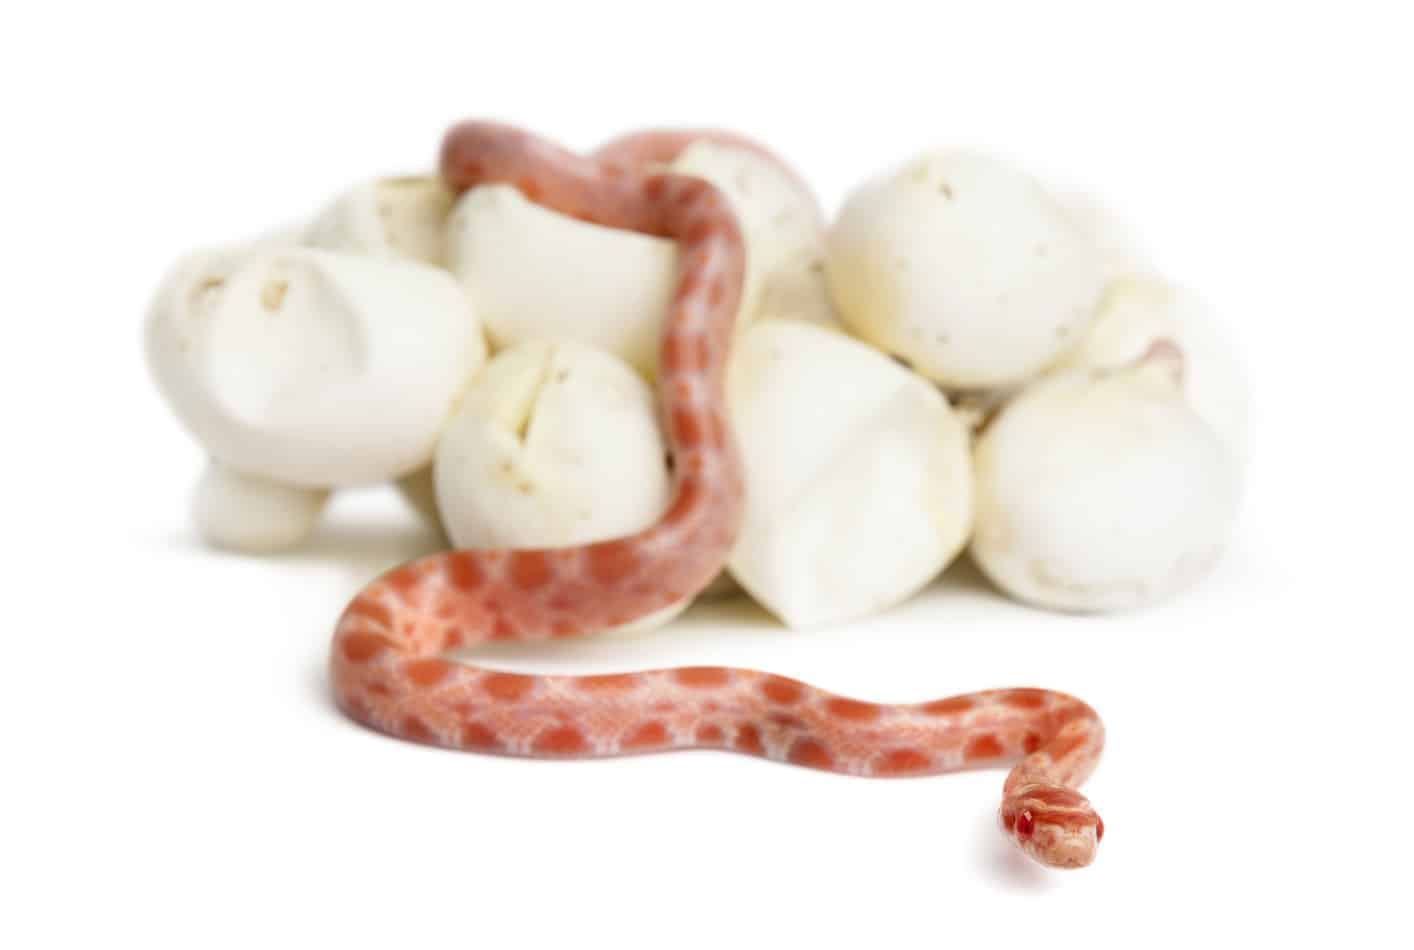 How Many Times a year do corn snakes lay eggs How Many Times a Year do Corn Snakes Lay Eggs?